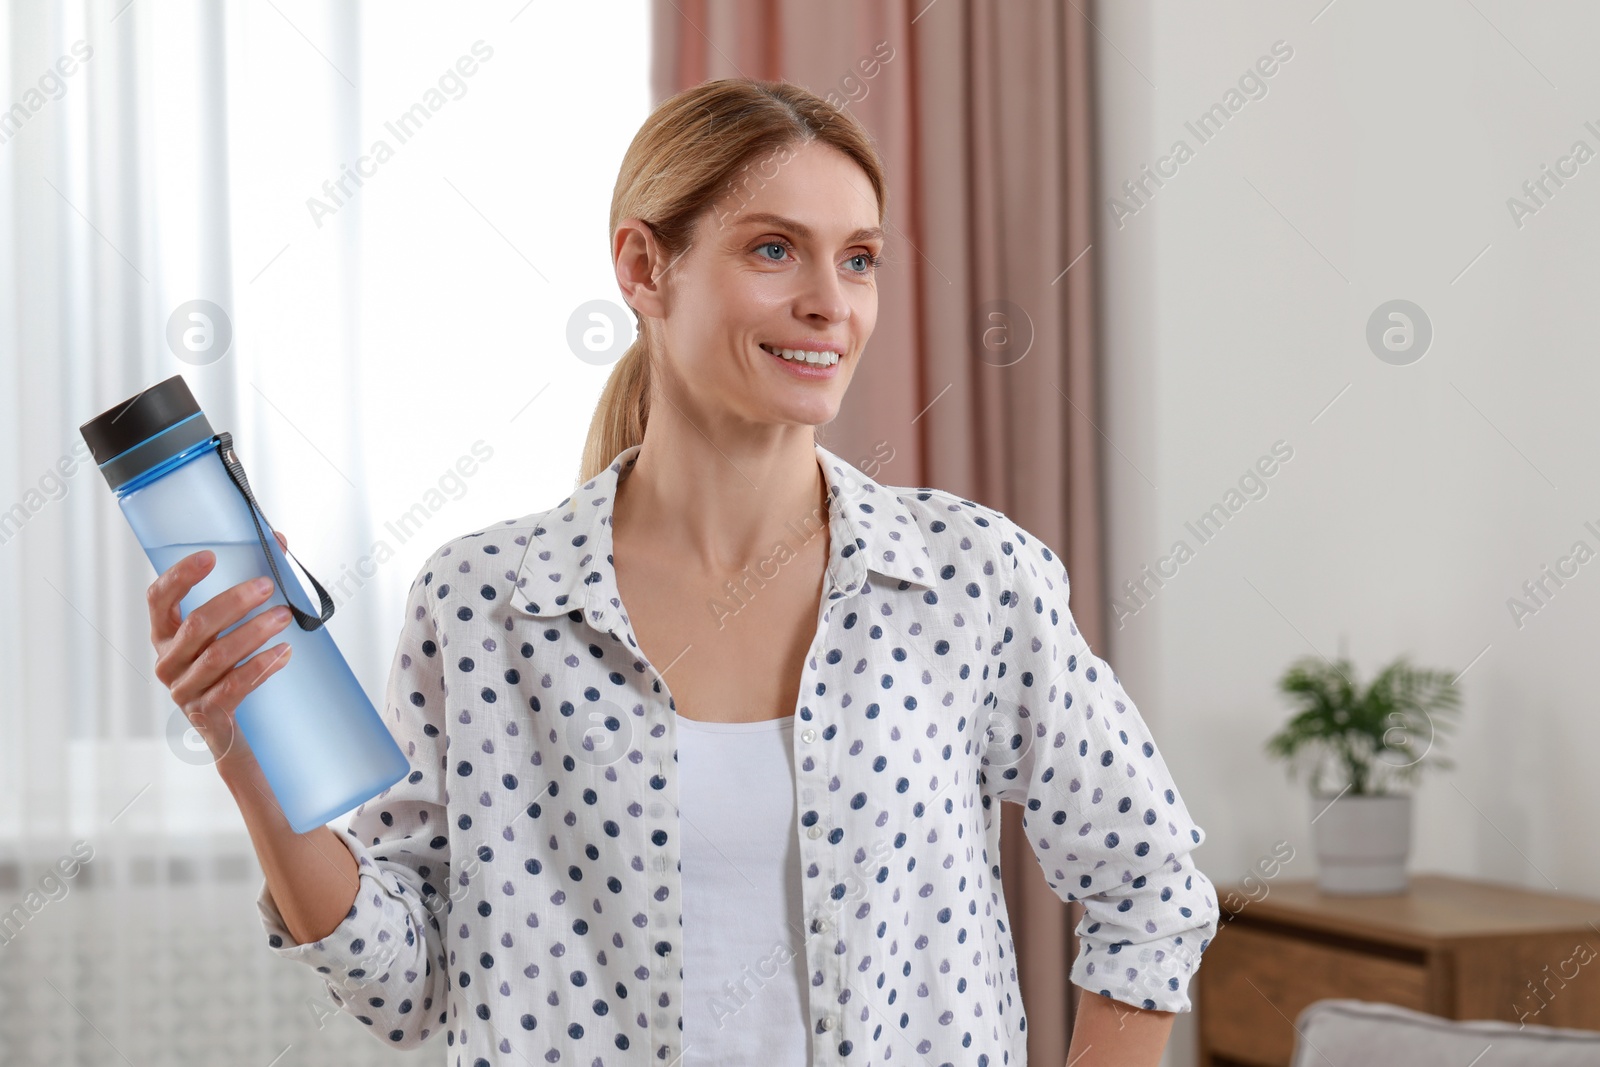 Photo of Woman with bottle of water in room